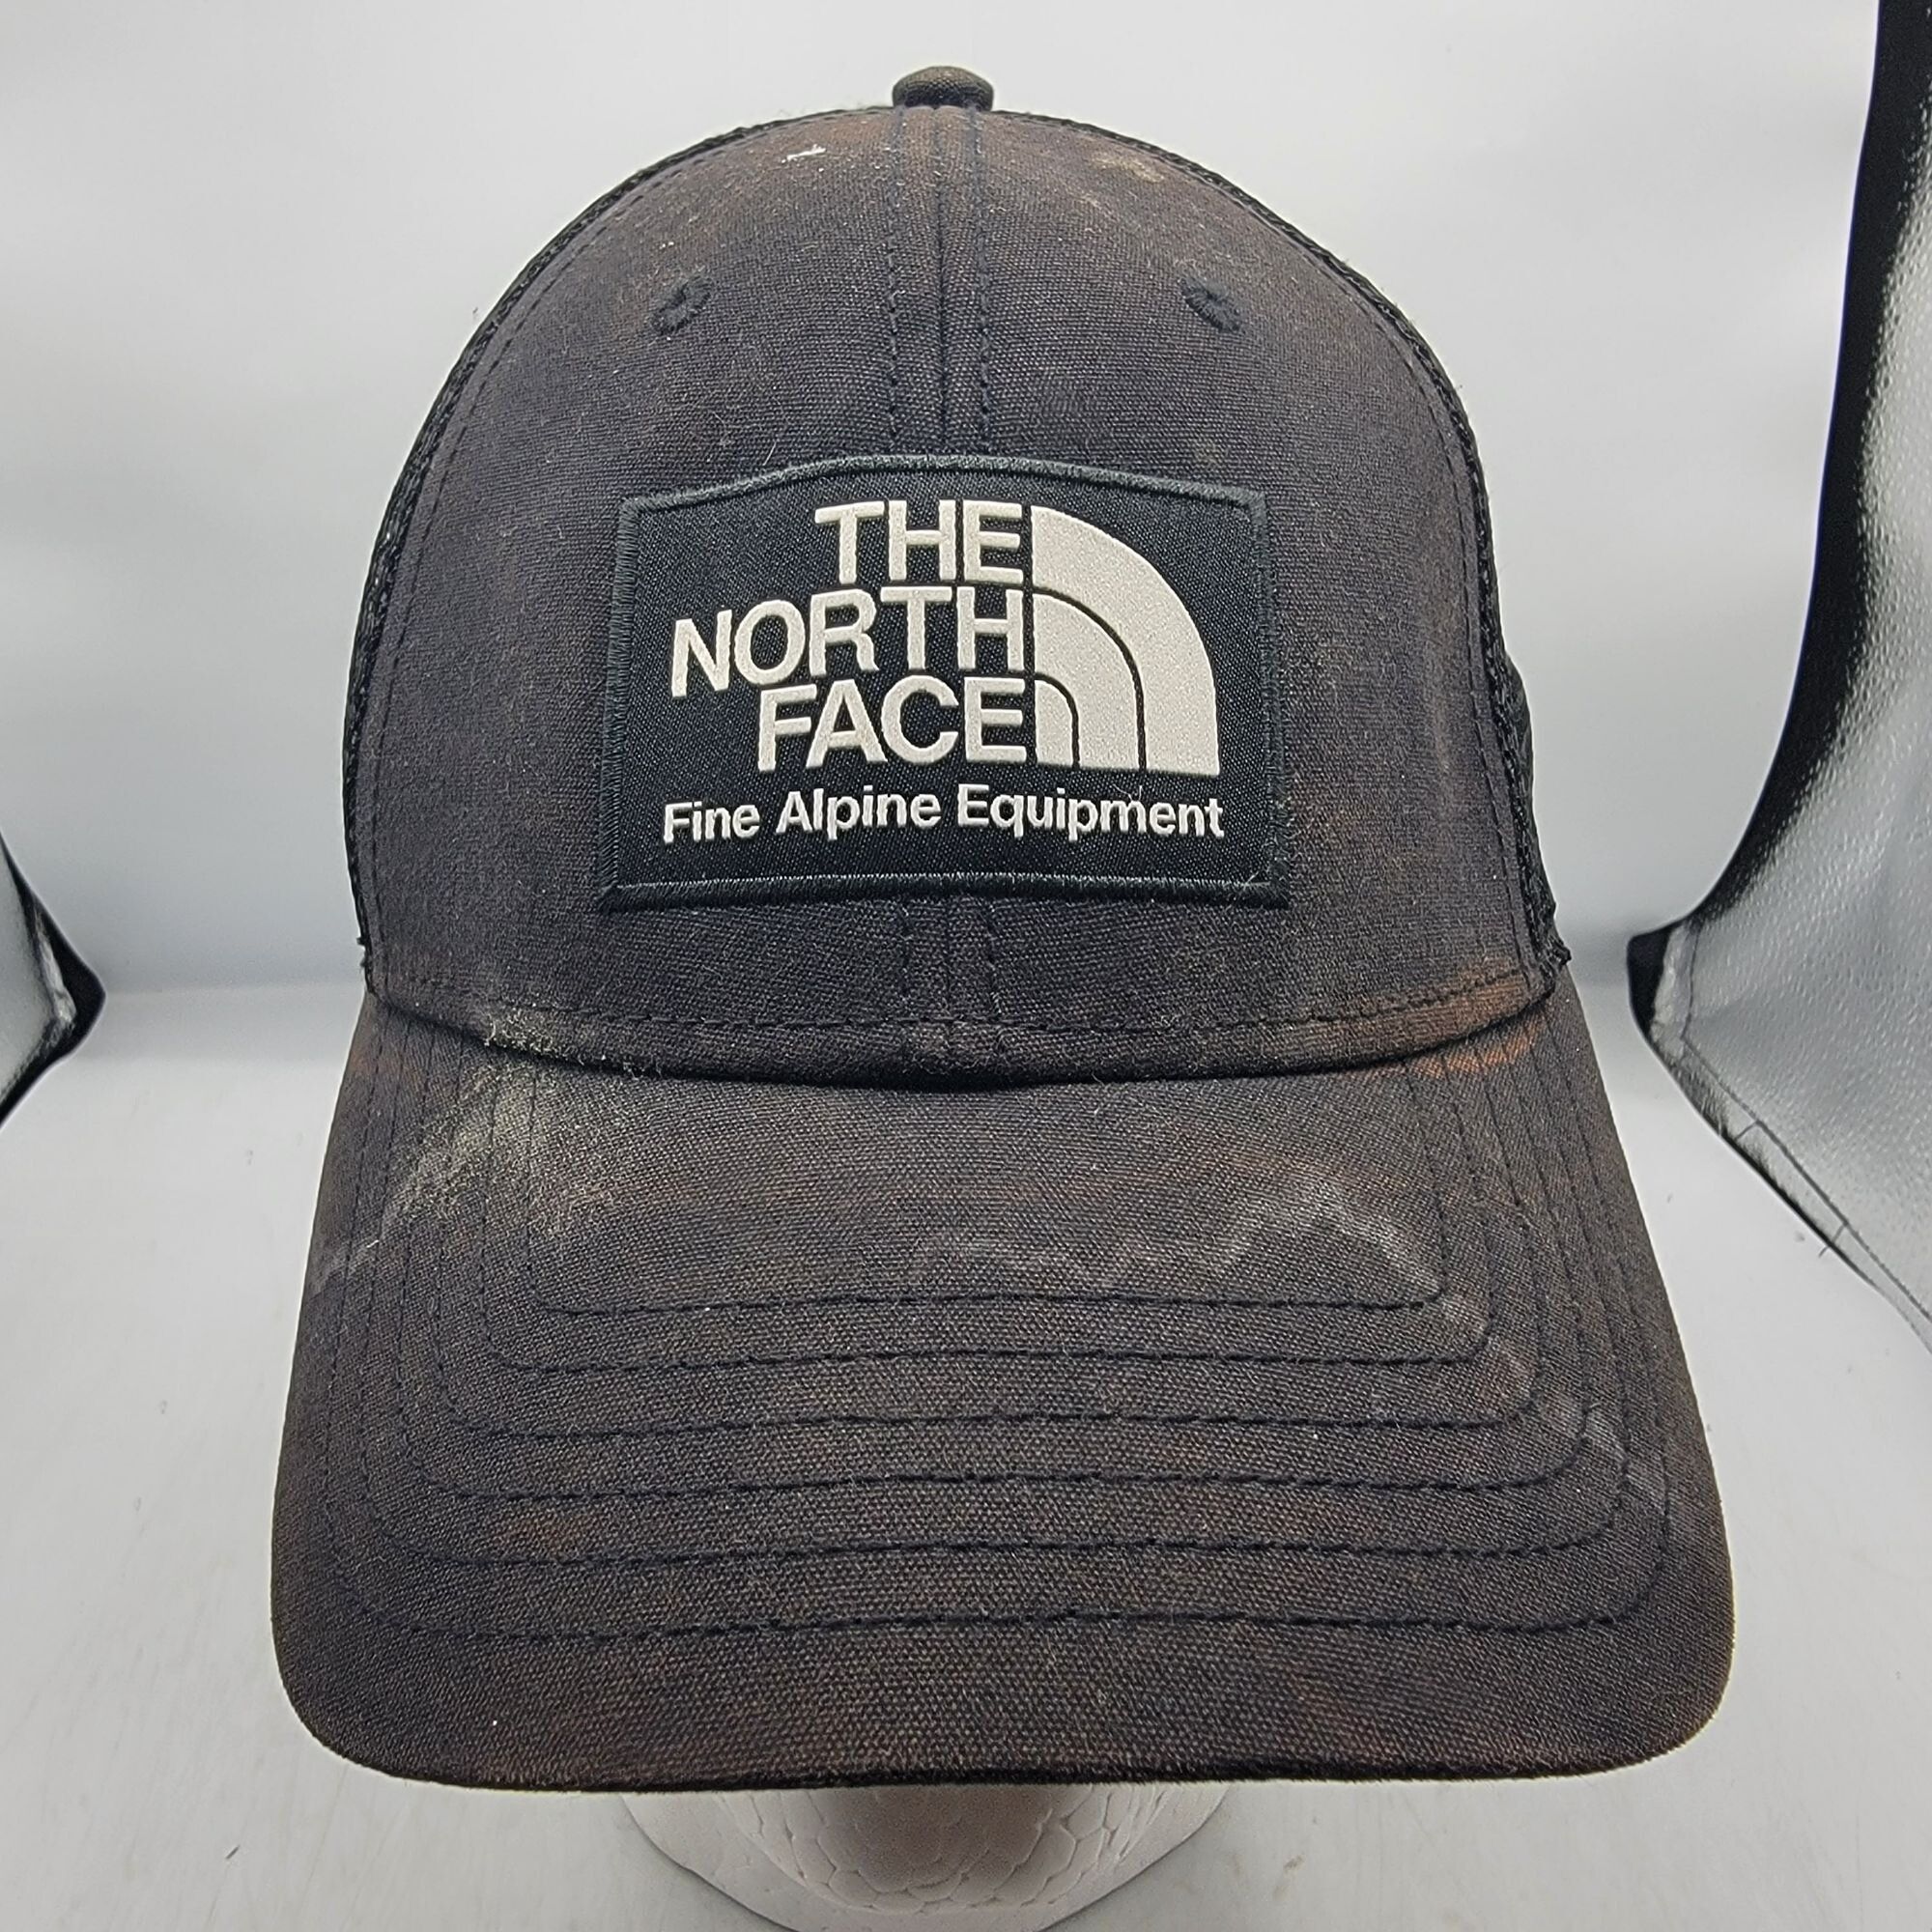 The North Face The North Face Mudder Trucker Hat Adults Unisex